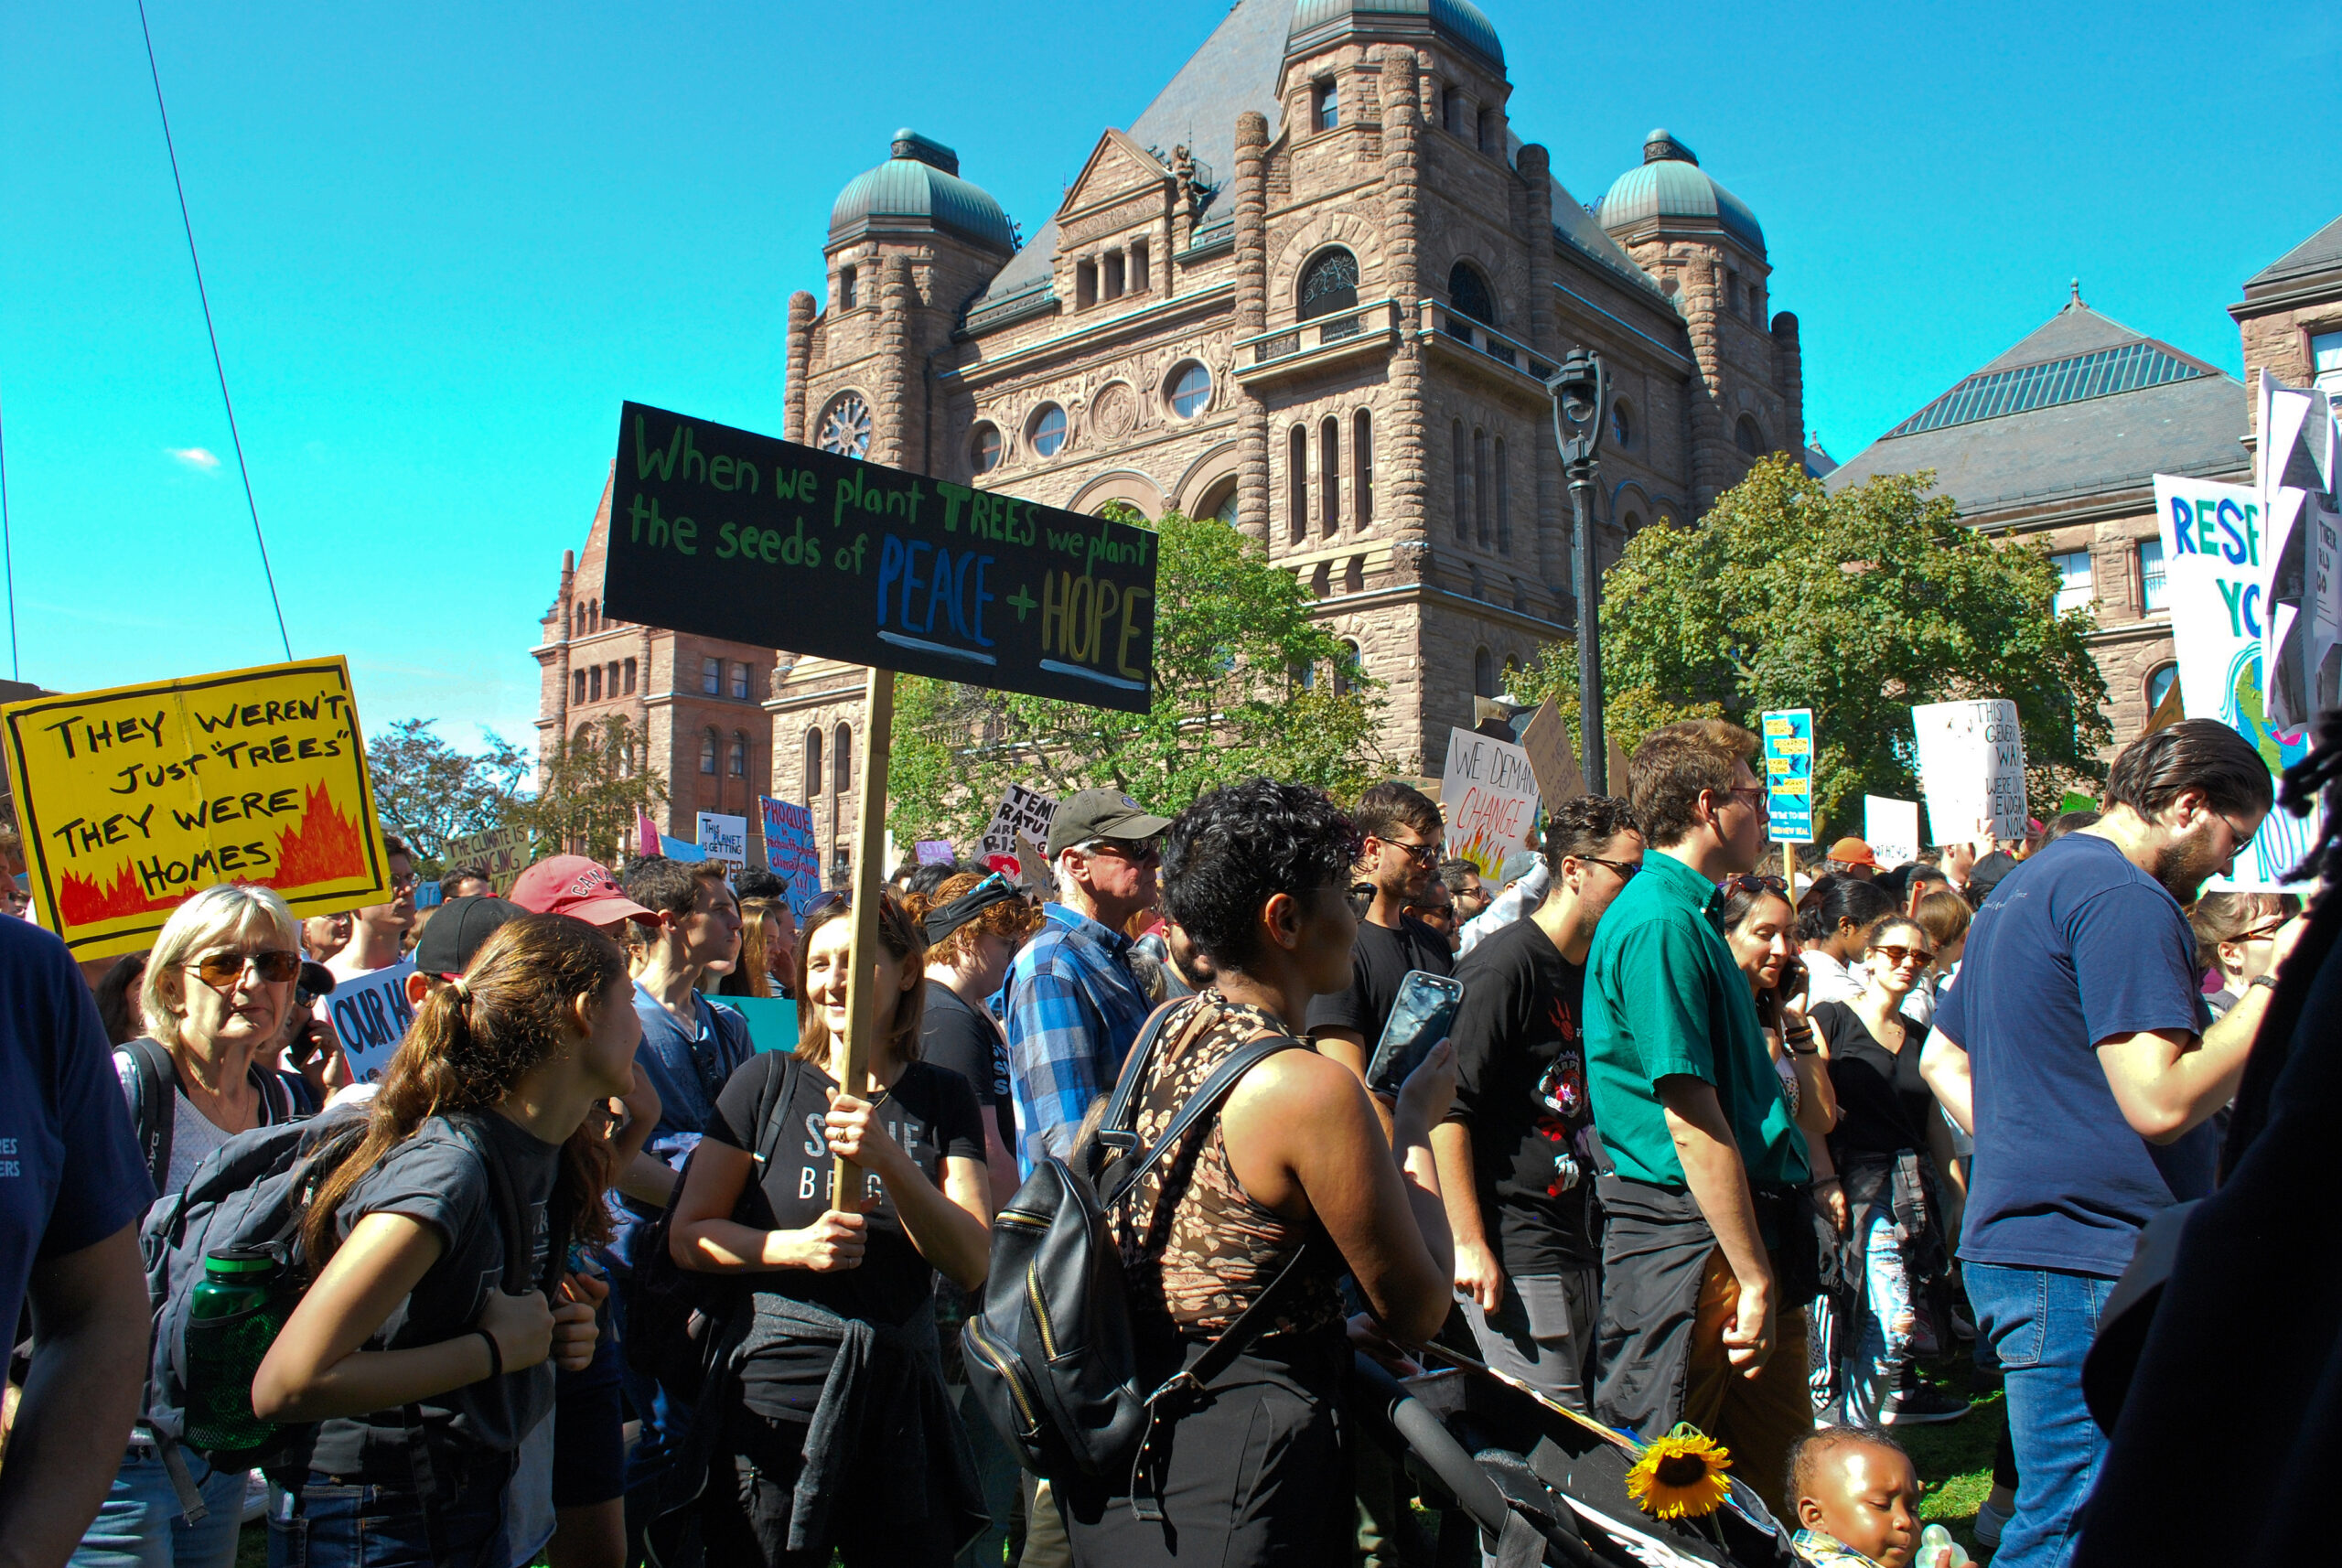 Youth gathered outside Queen's park for a 2019 climate strike